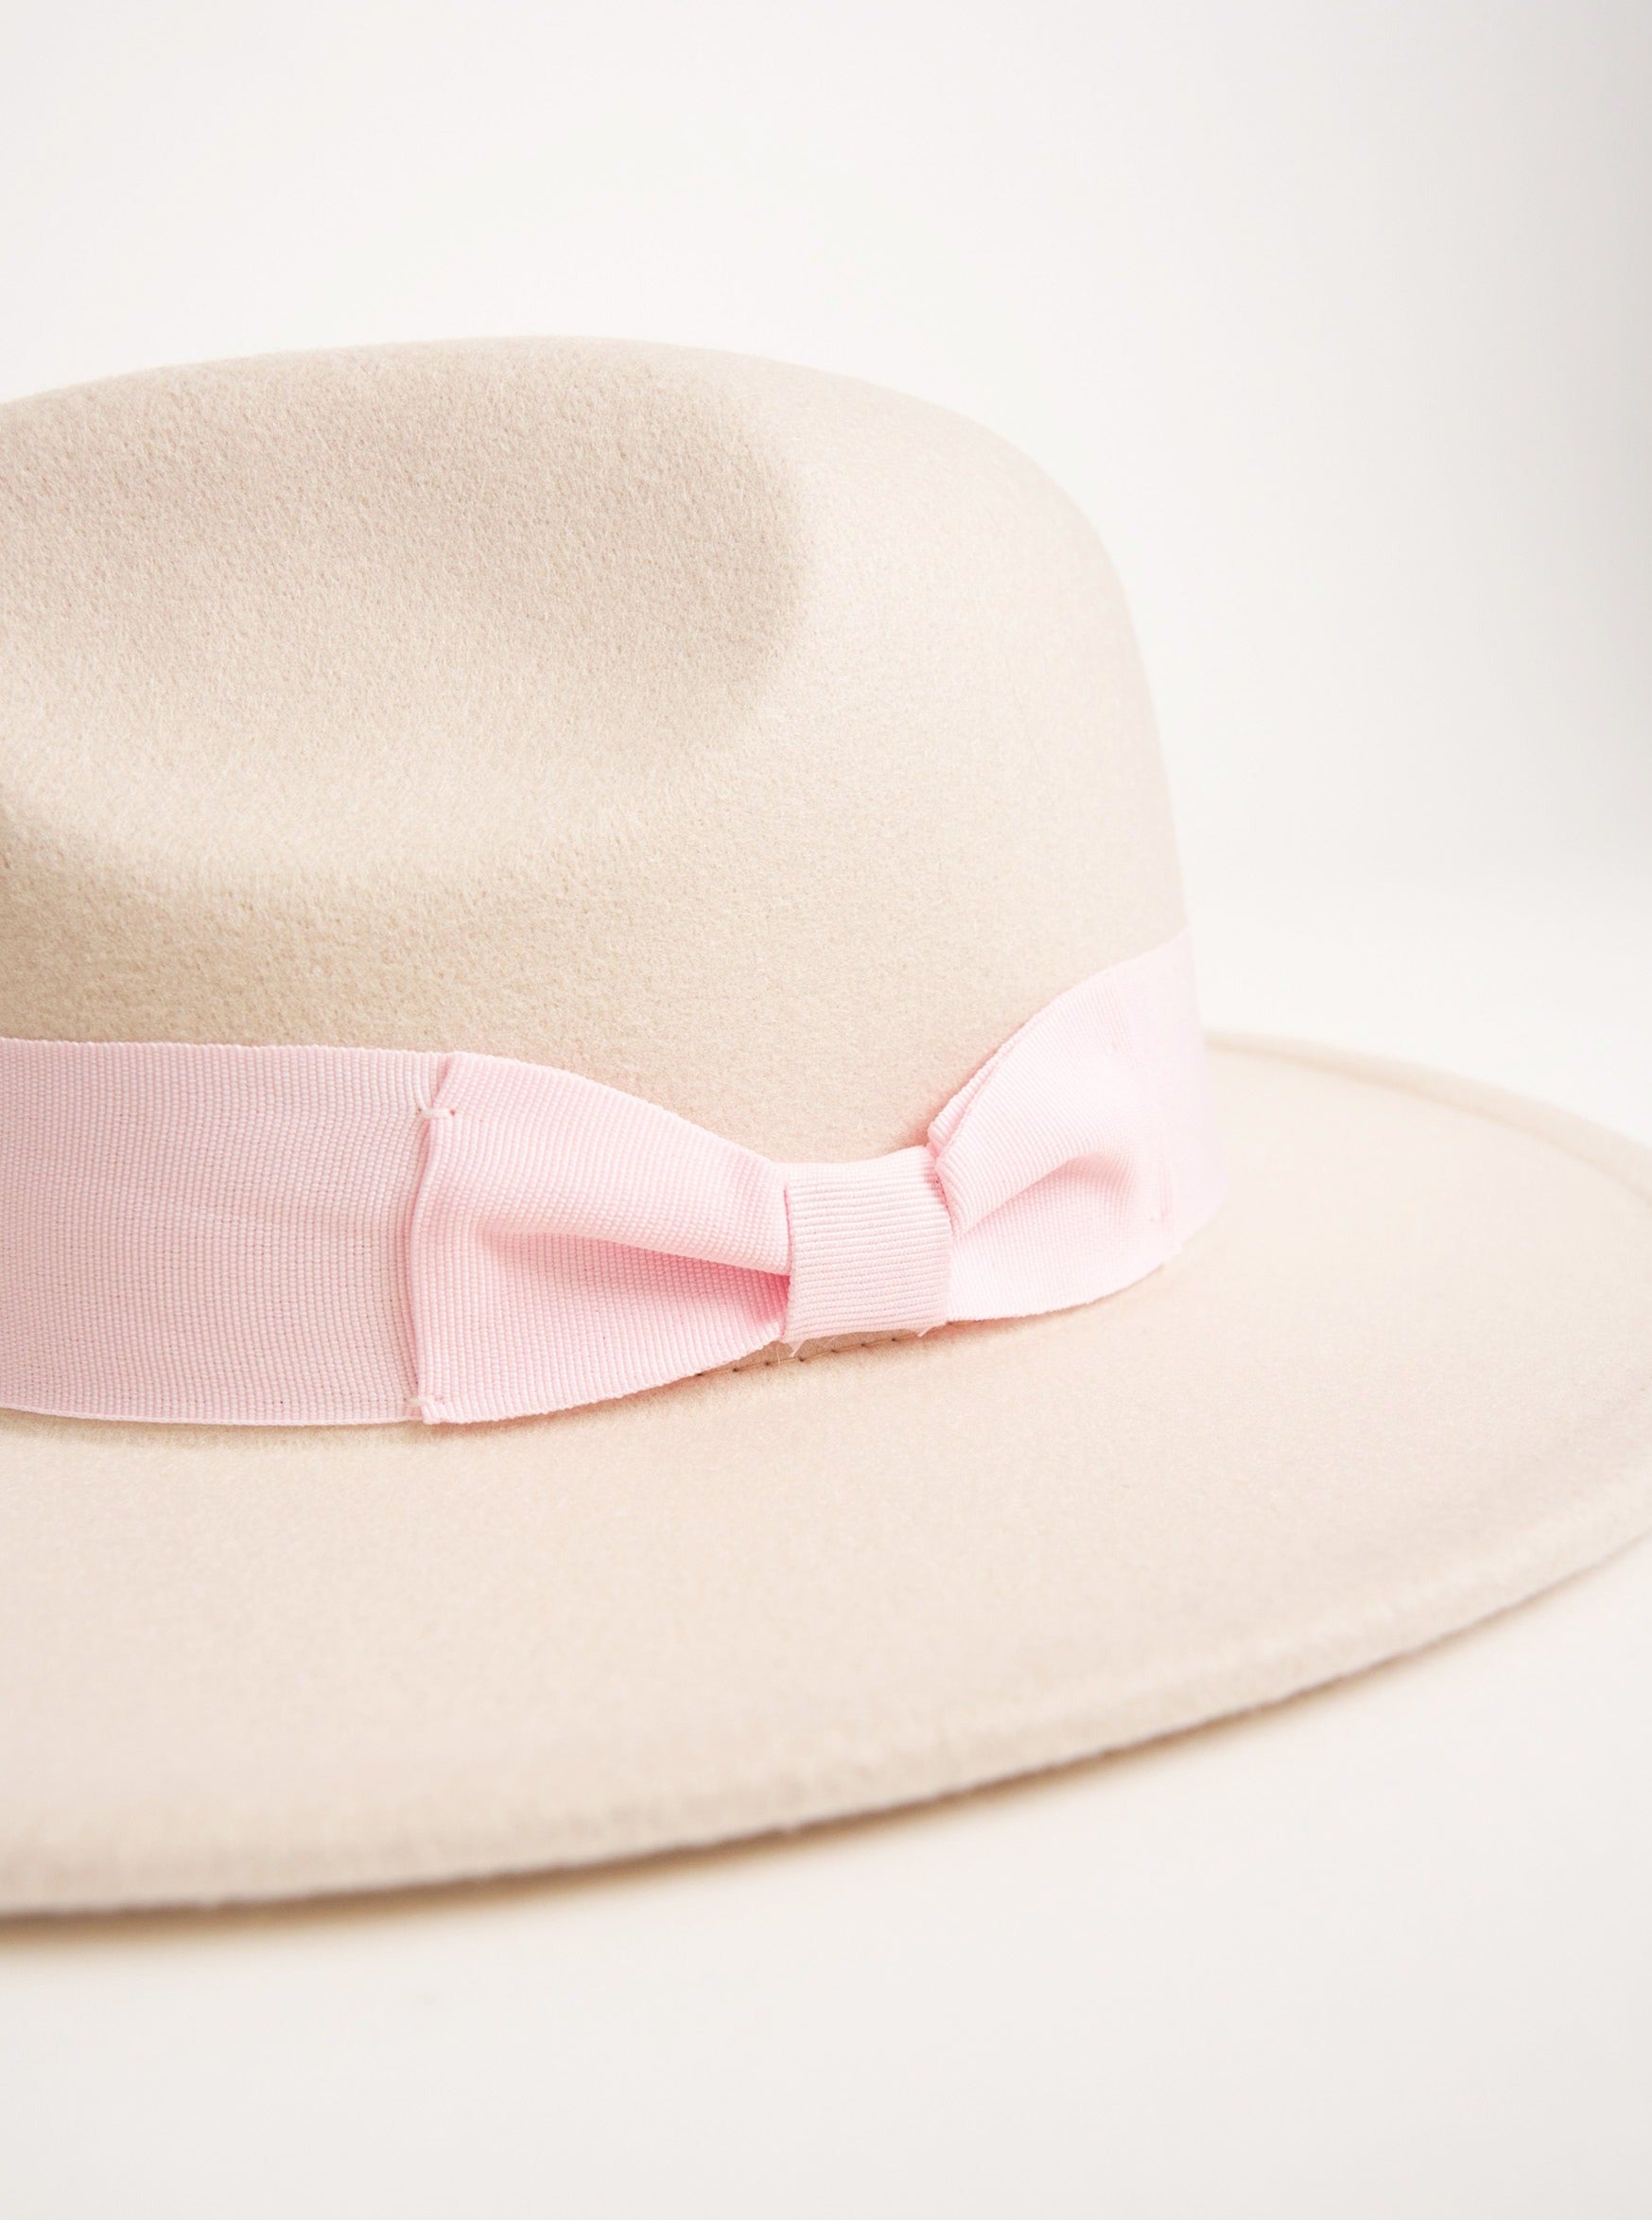 Fedora Hat in Beige with Pink Bow Trim and size adjuster | wedding guest | wedding | Party | Winter | Autumn | Walks | Festival | Holiday | Lolita | Coquette | Women's | Accessories | Hat | Accessory